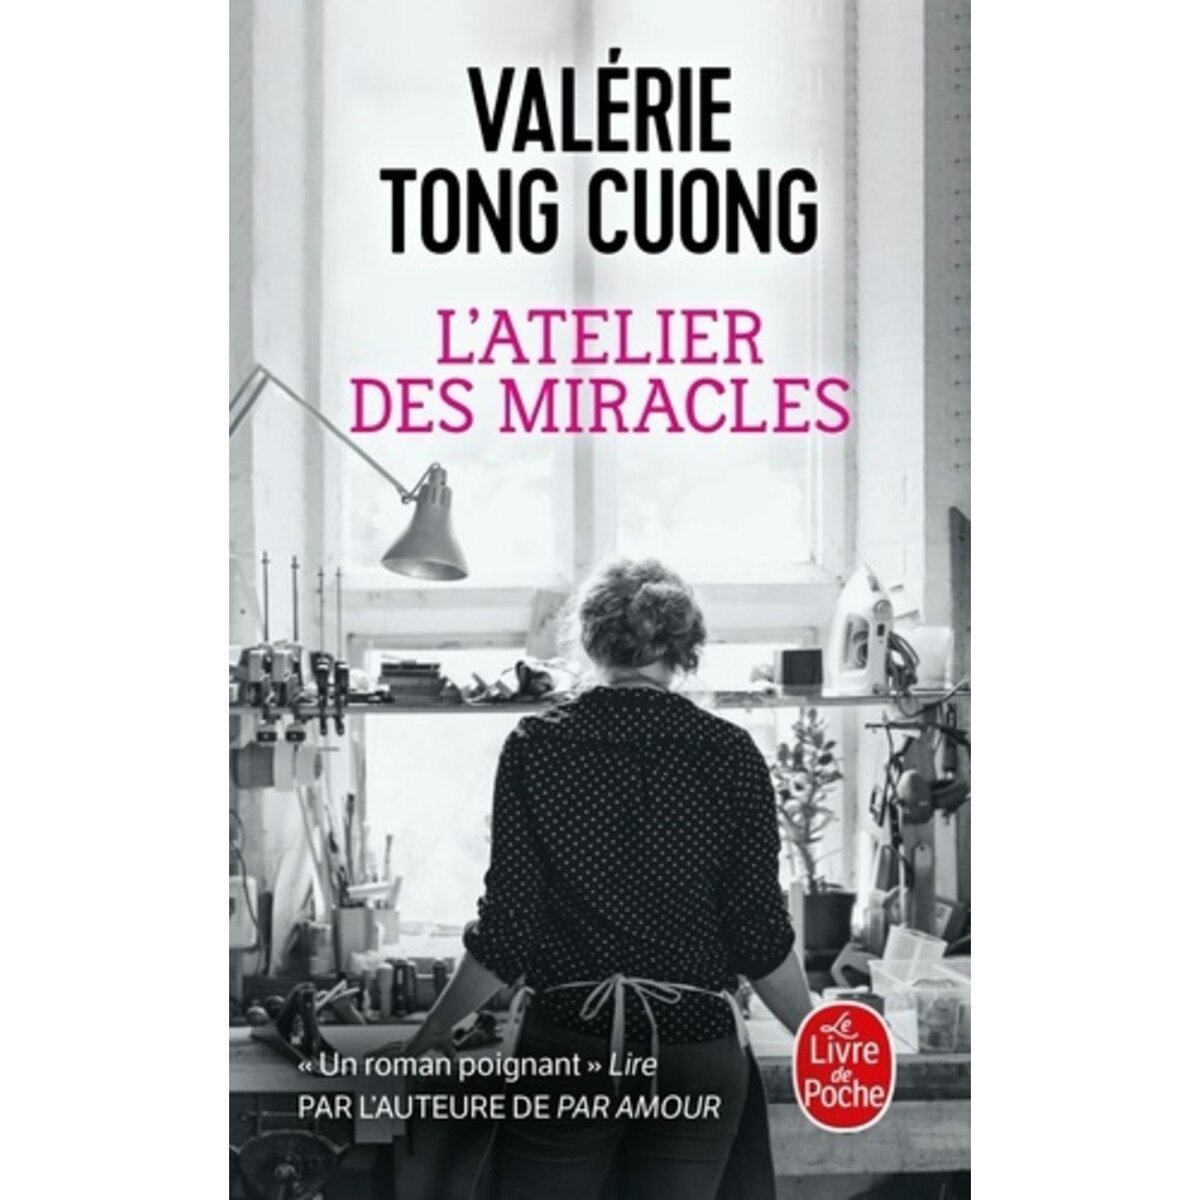  L'ATELIER DES MIRACLES, Tong Cuong Valérie